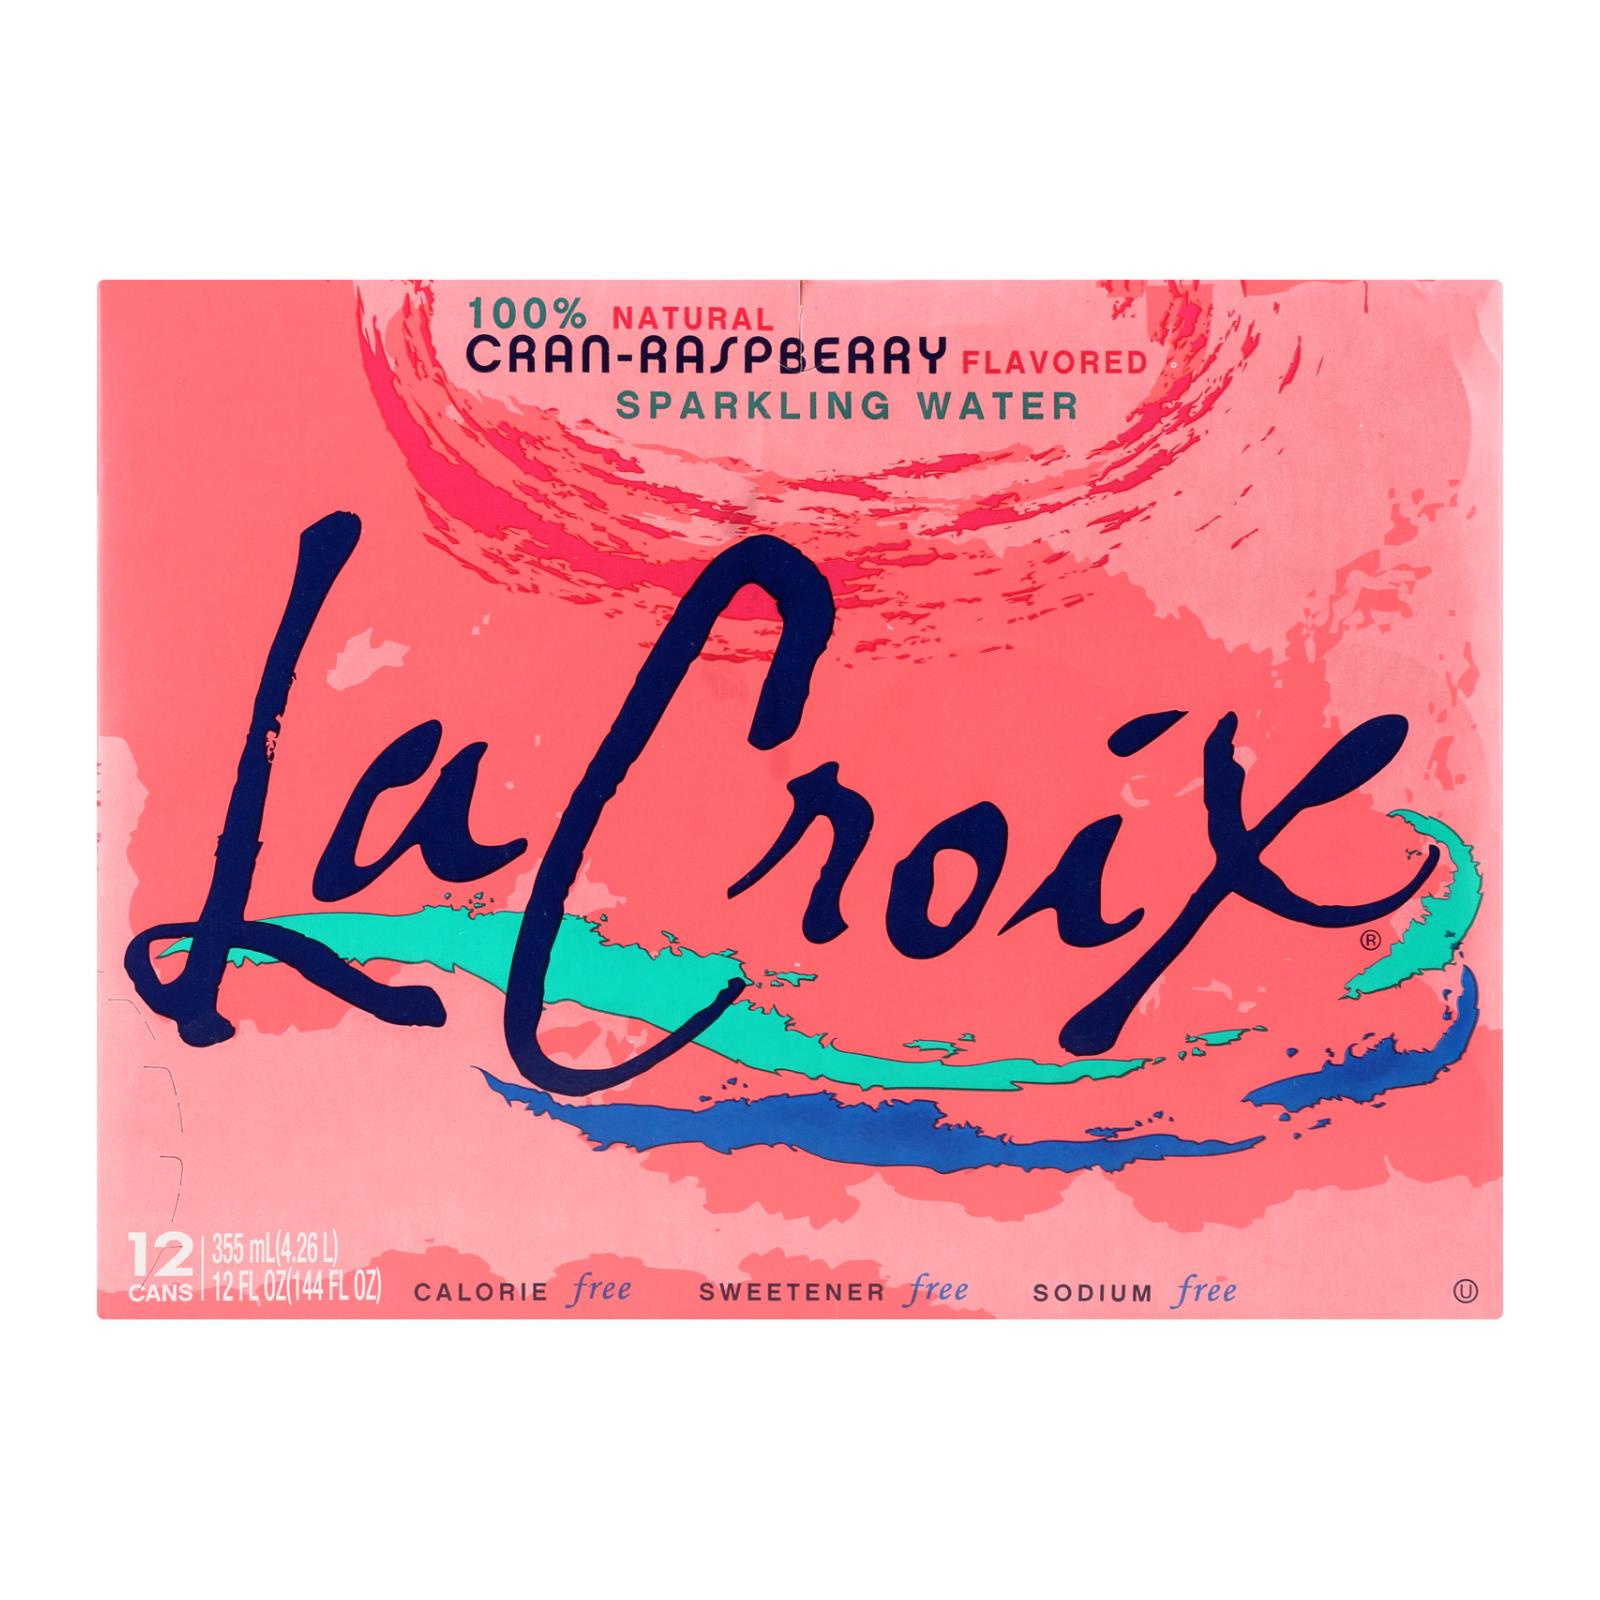 Lacroix Natural Sparkling Water - Cran-raspberry - Case Of 2 - 12 Fl Oz. - Whole Green Foods